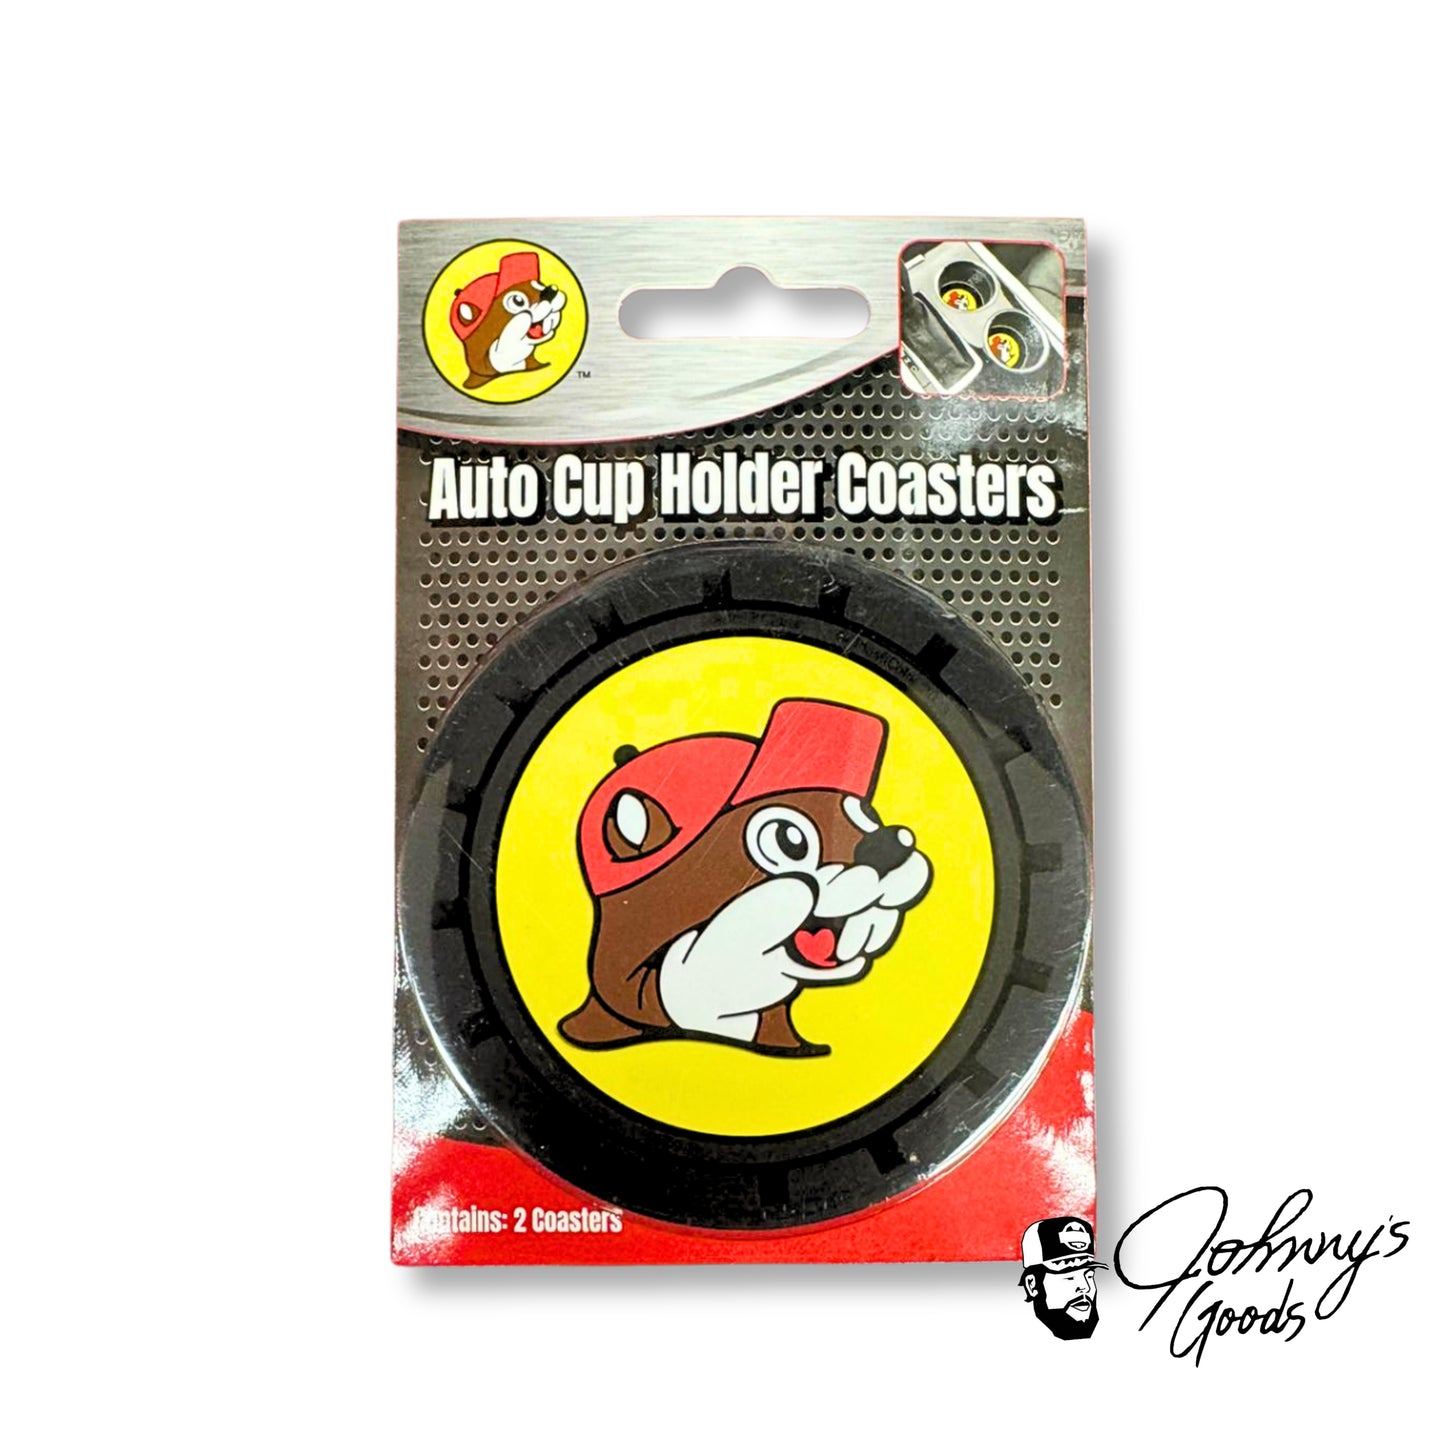 Buc-ee's Auto Cup Holder Coasters